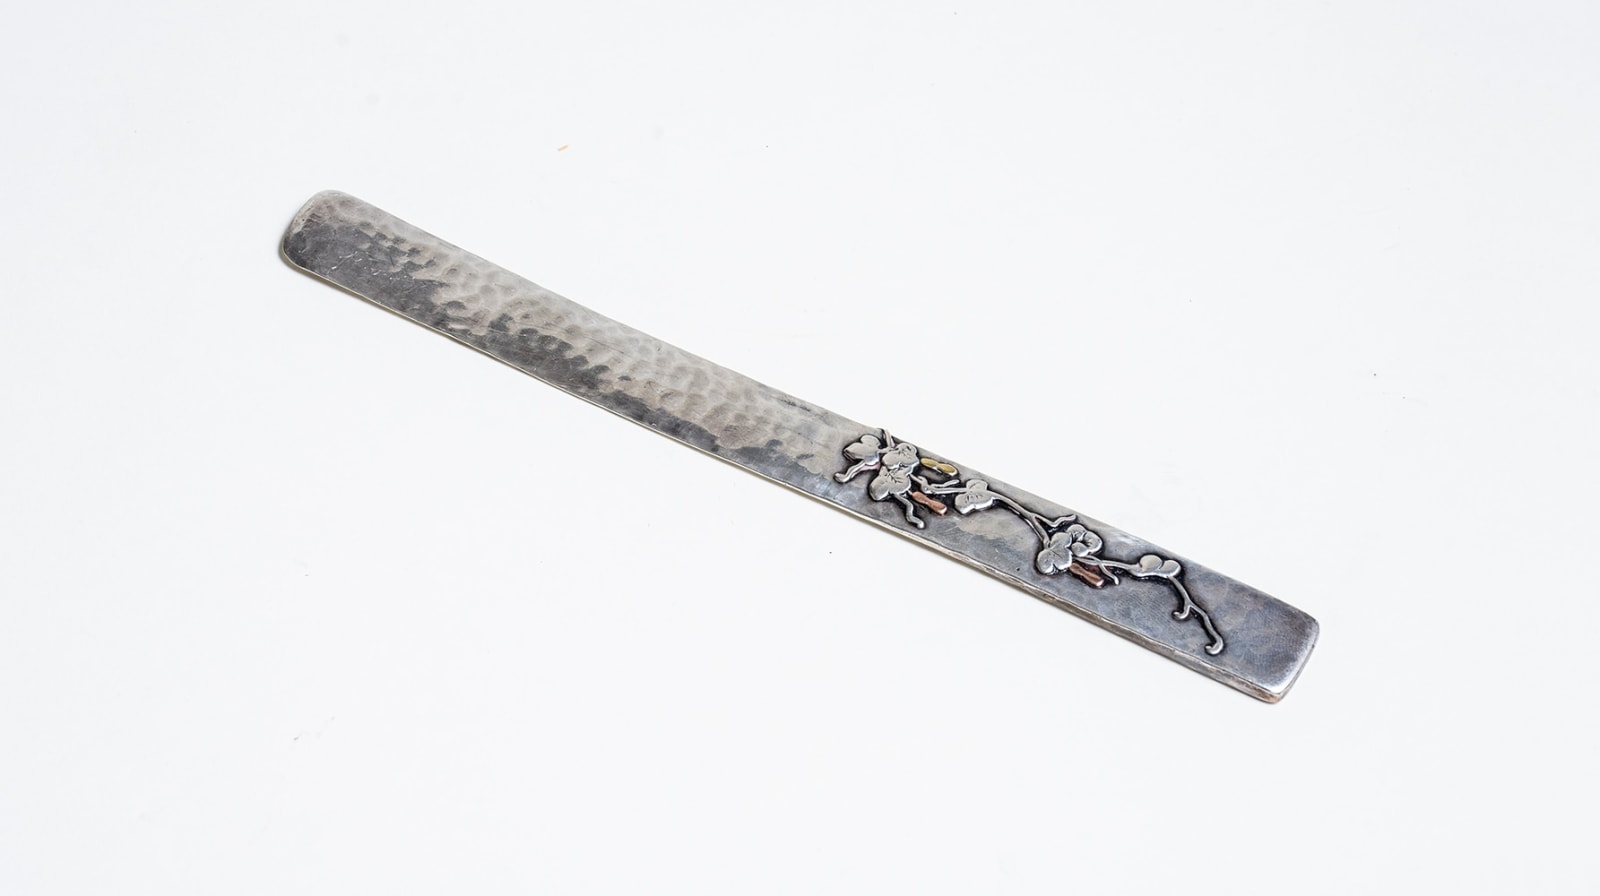 a thin rectangular paper knife in sterling silver with squared edges, the handle with. mixed metal decoration of squash or gourds in copper and bronze with a thin swirling vine and leaves in raised silver